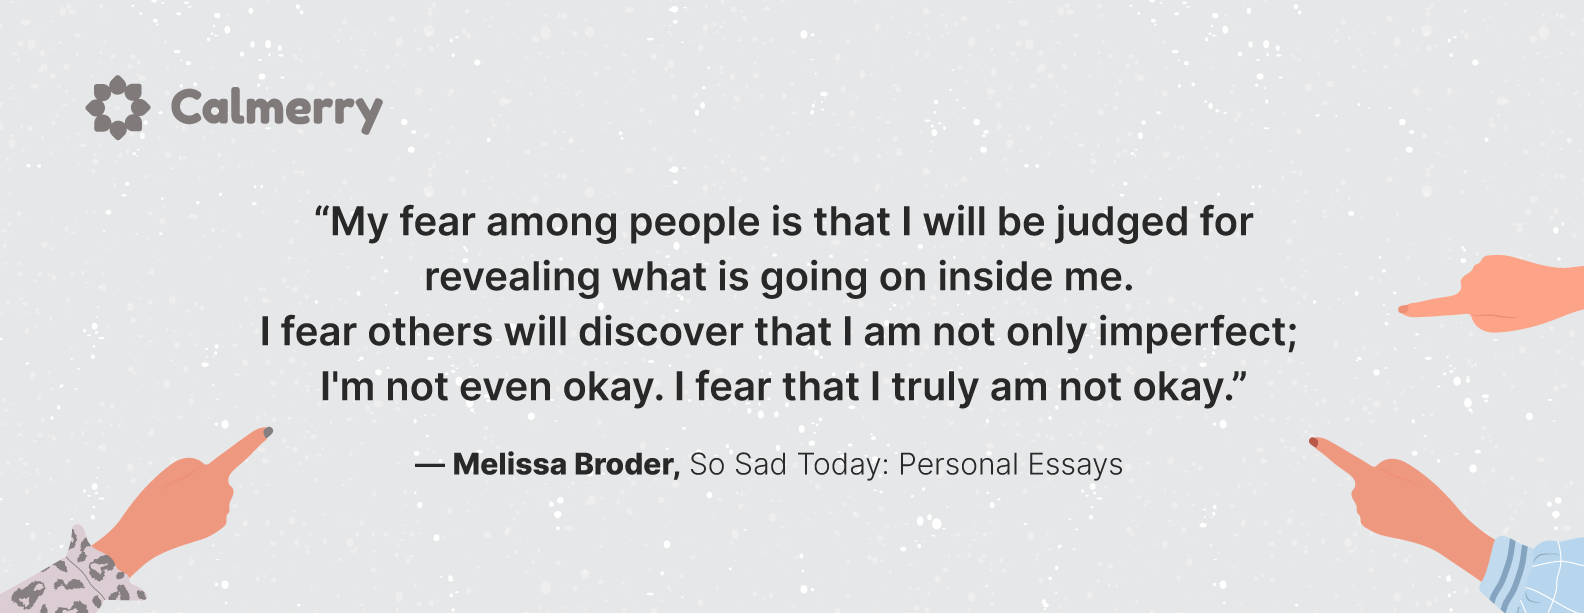 Melissa Broder quote on social anxiety